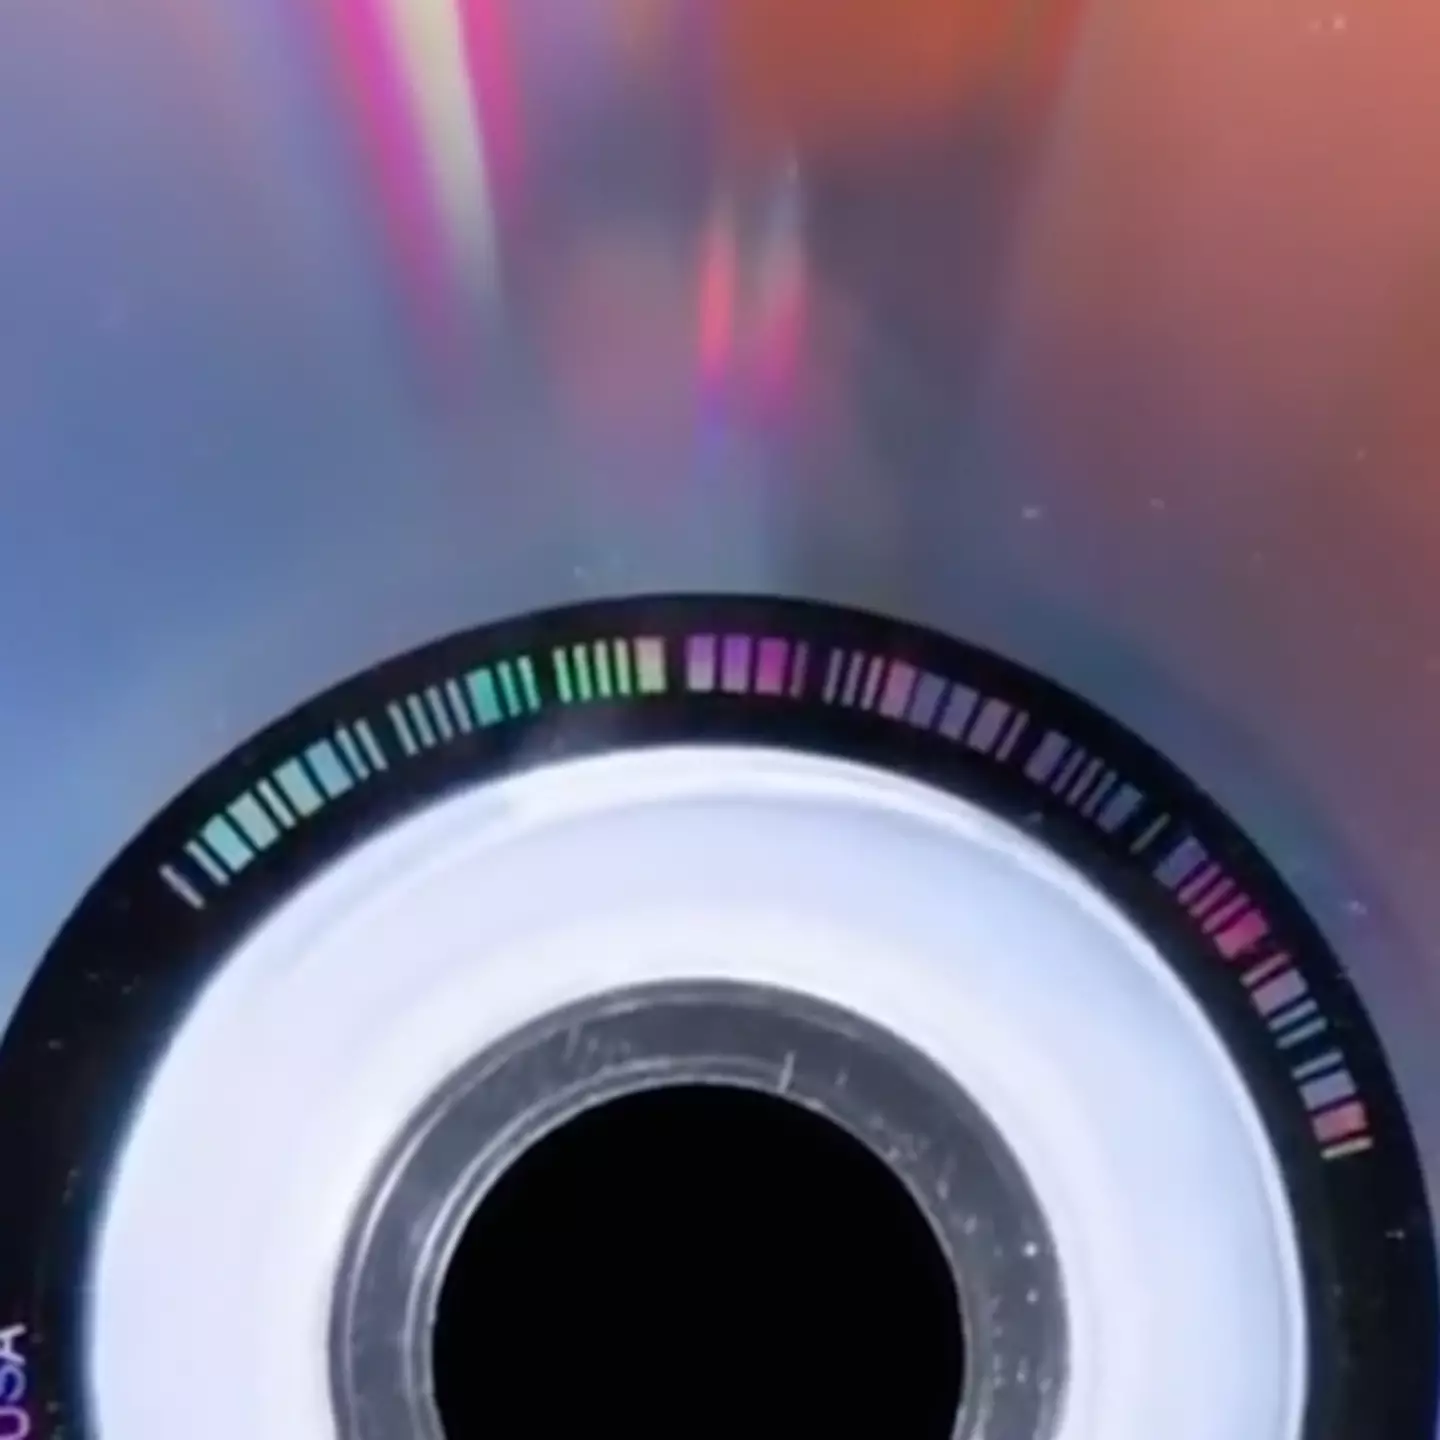 Video showing how the inside of a CD works is leaving people gobsmacked